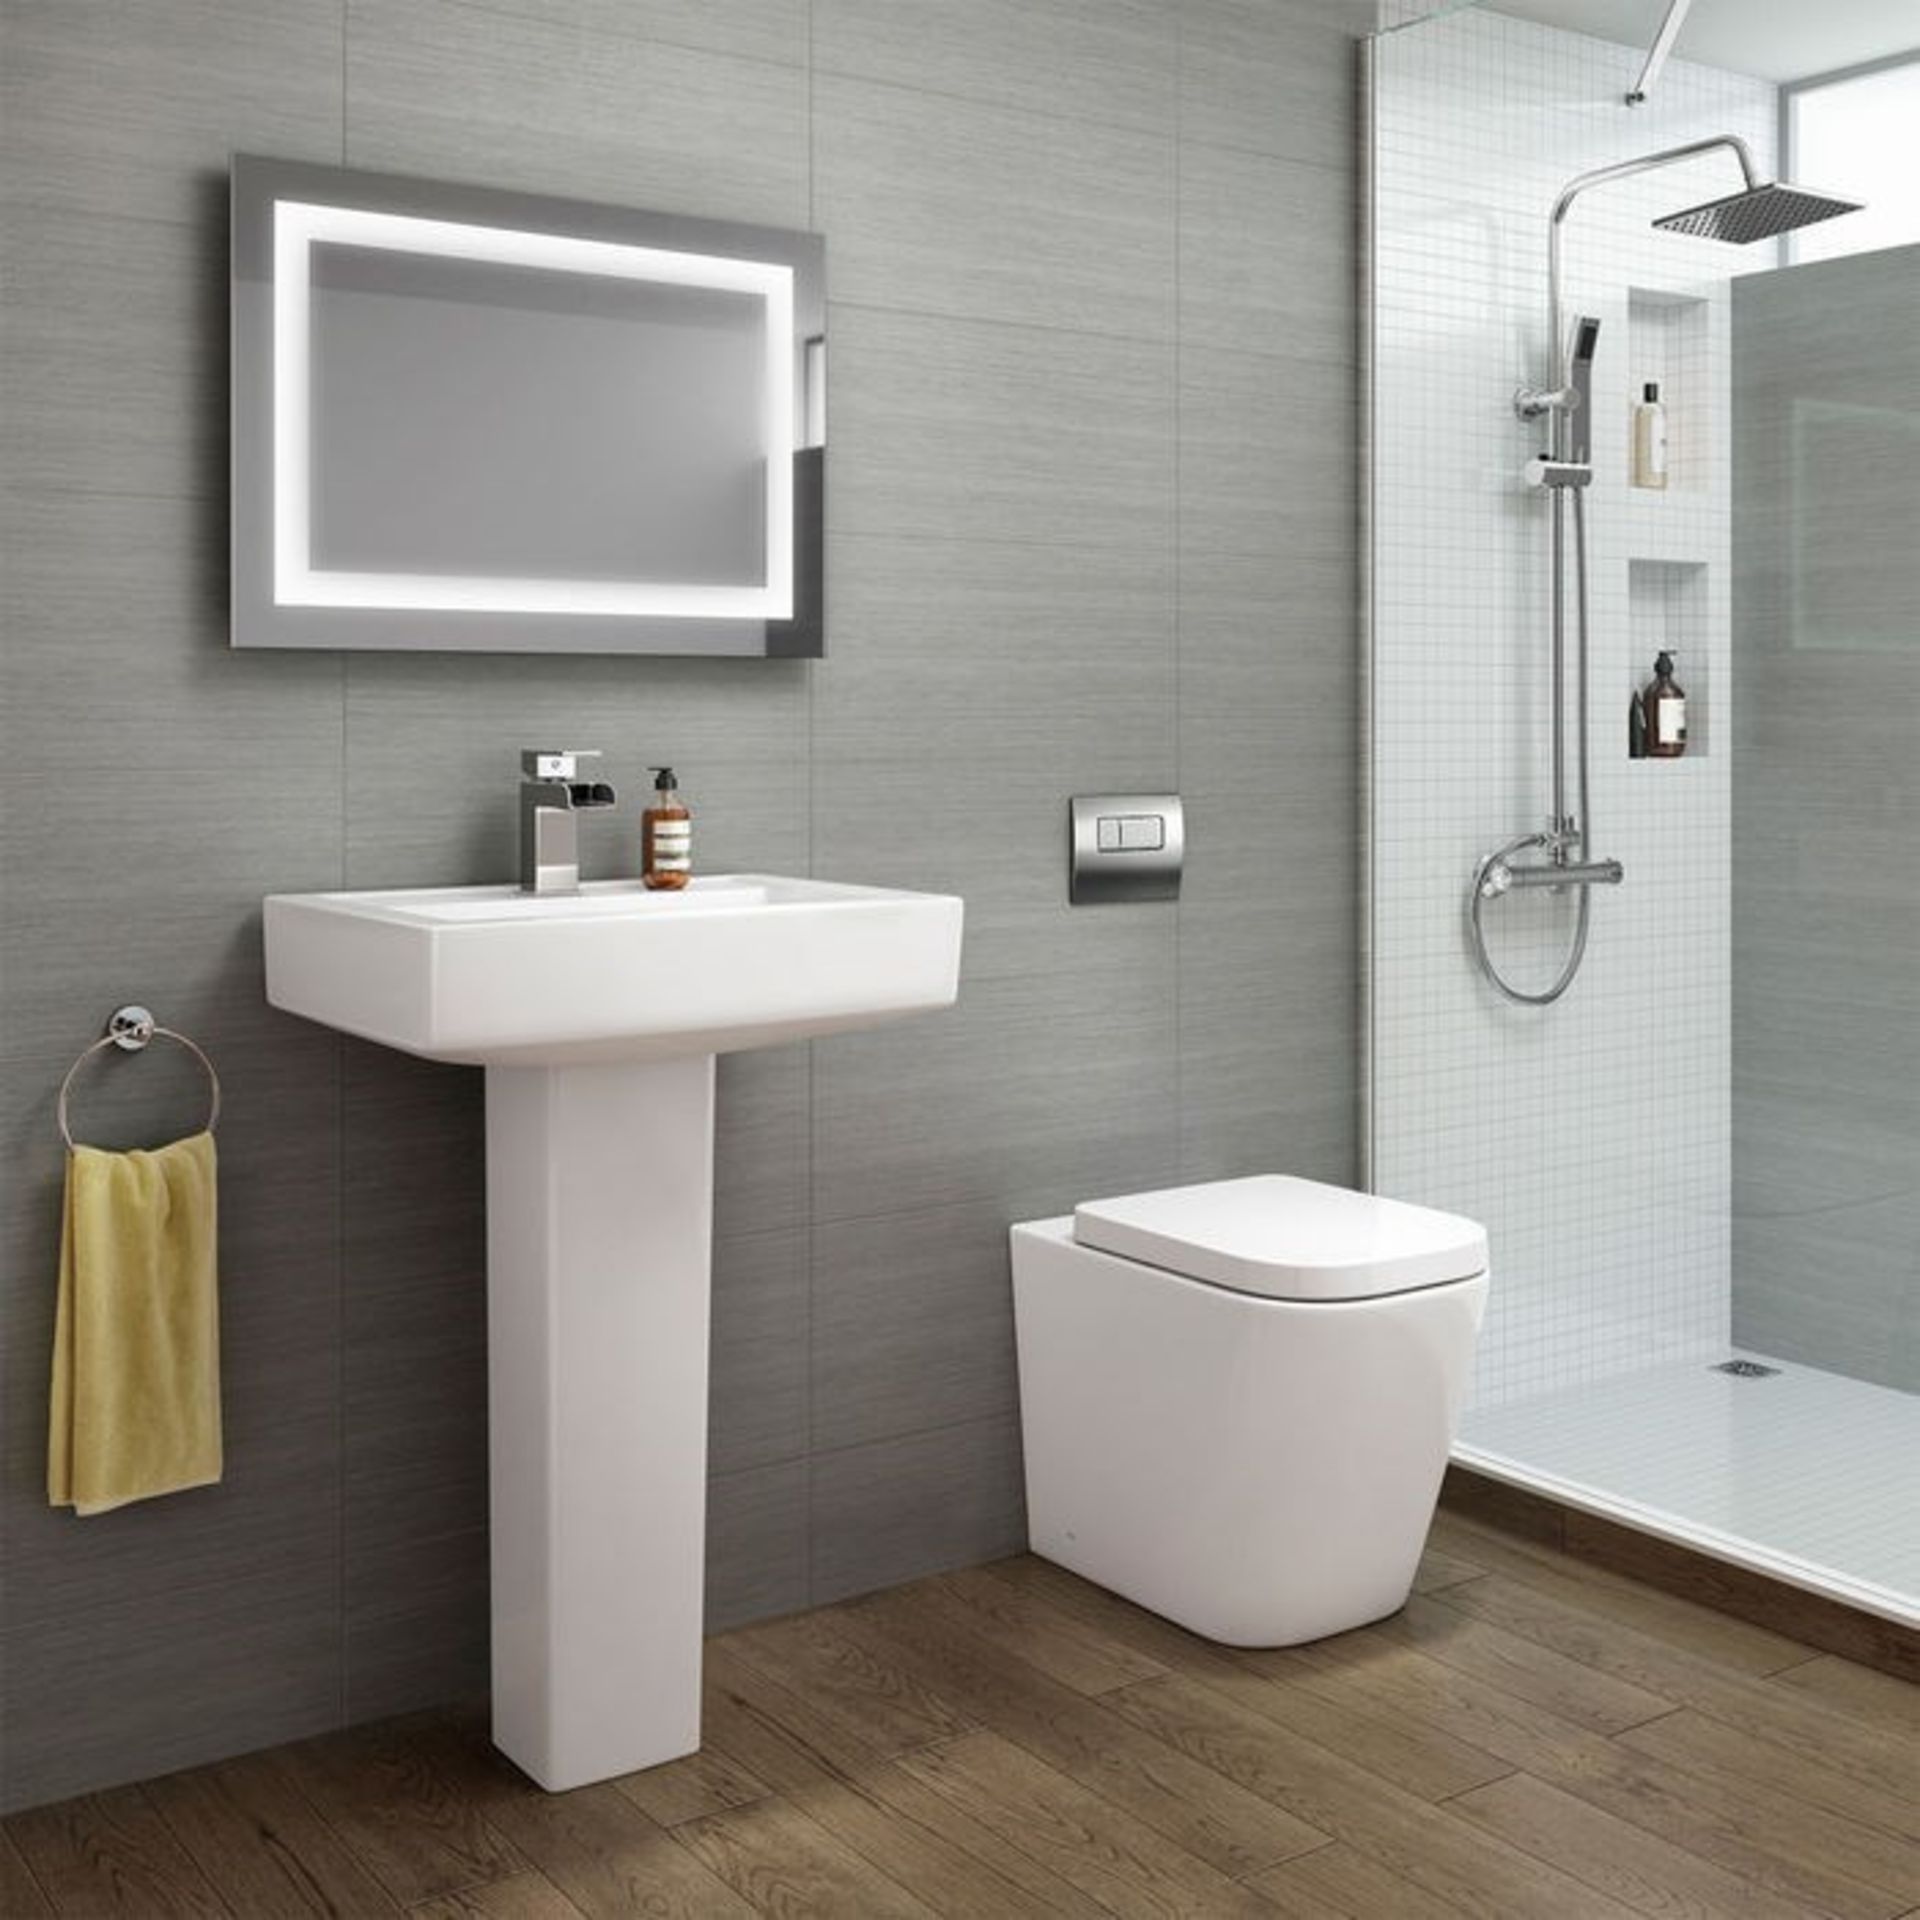 NEW & BOXED Florence Rimless Back to Wall Toilet inc Luxury Soft Close Seat.RRP £349.99 each.R... - Image 2 of 2